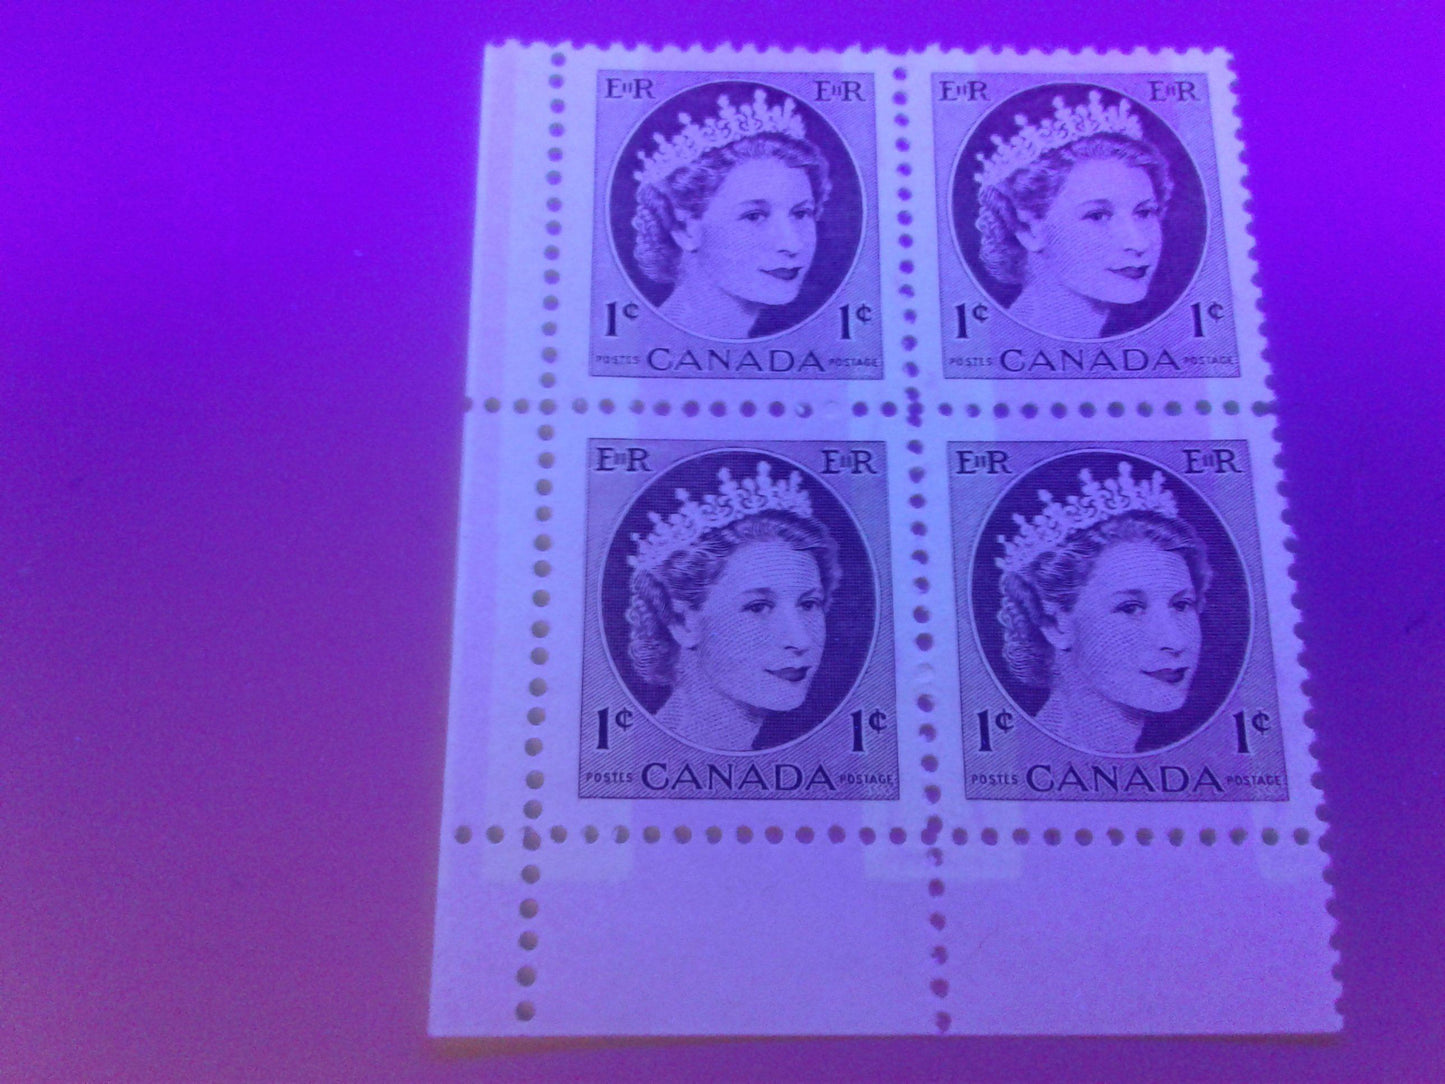 Canada #337p 1c Chocolate Queen Elizabeth II, 1954-1962 Wilding Issue, Lower Left Blank Winnipeg Tagged Blocks of 4, Two Different, Various Perfs. , NF Br Vertically Ribbed Paper, Streaky Semi Gloss Gum, Light Yellow Tagging With Additional Tagging, VFNH Brixton Chrome 